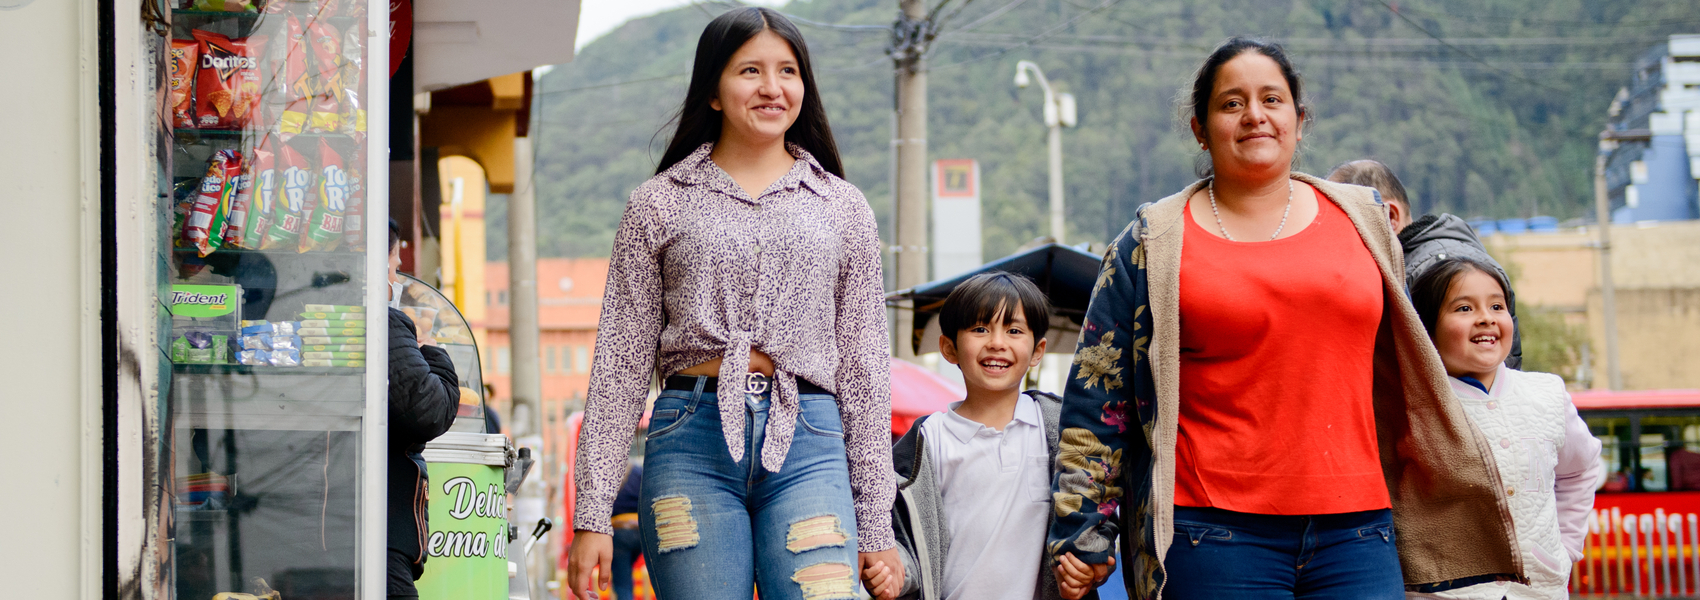 Colombian refugee woman Jeidi walks city streets with her children